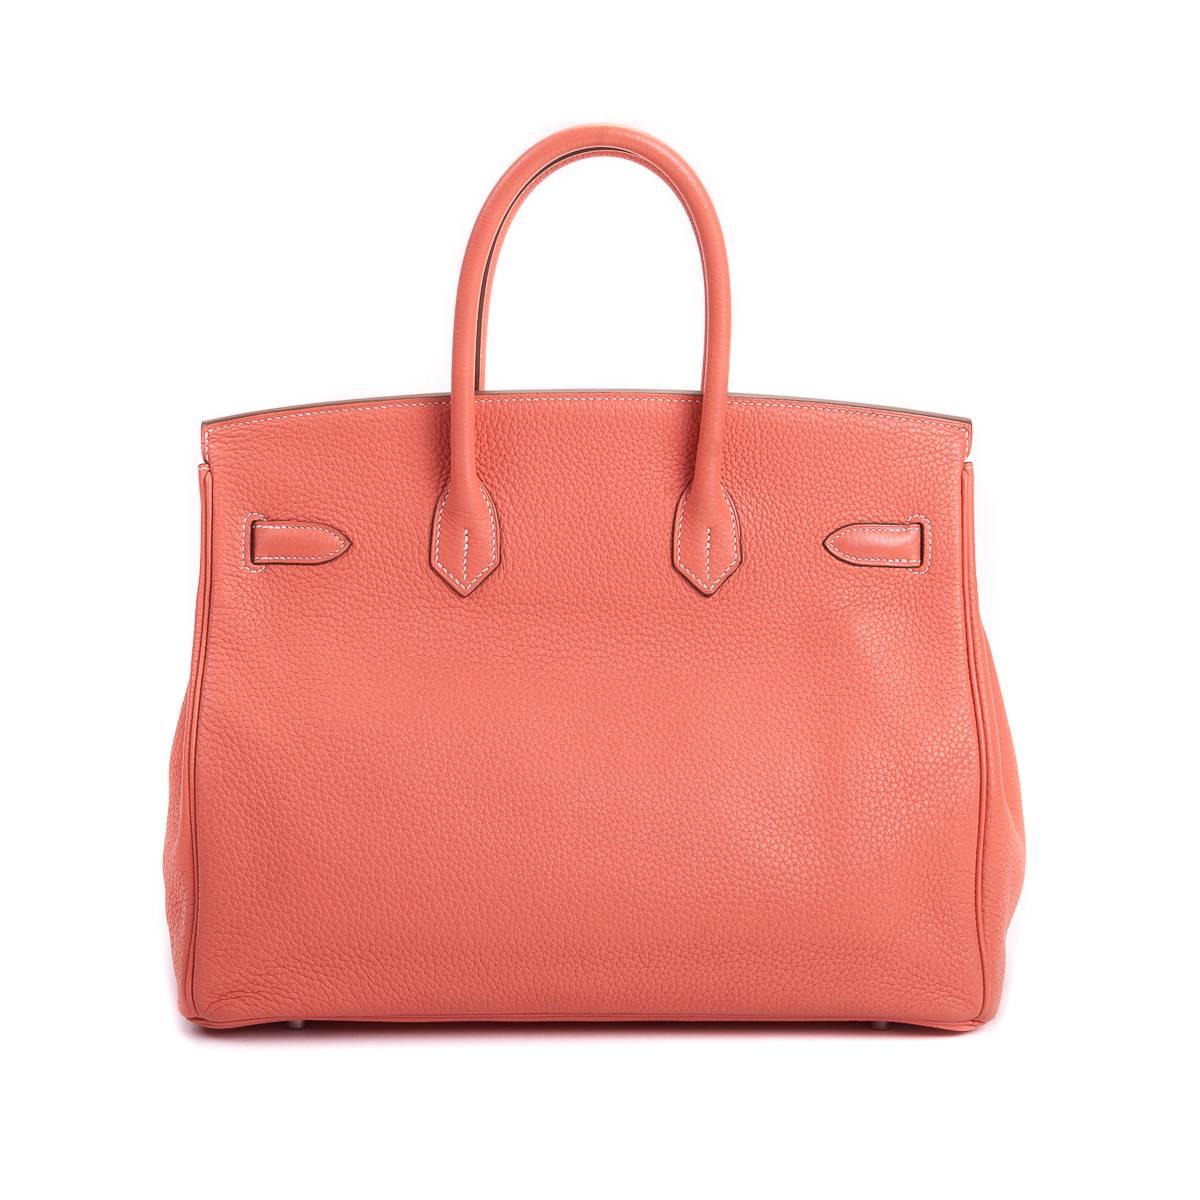 The iconic Hermes Birkin is a must have for any designer handbag collector. Keep your belongings safe with the lock and clasps, plus perk up your wardrobe in this beautiful Crevette shade.

The handbag has been worn twice, but aside from a light